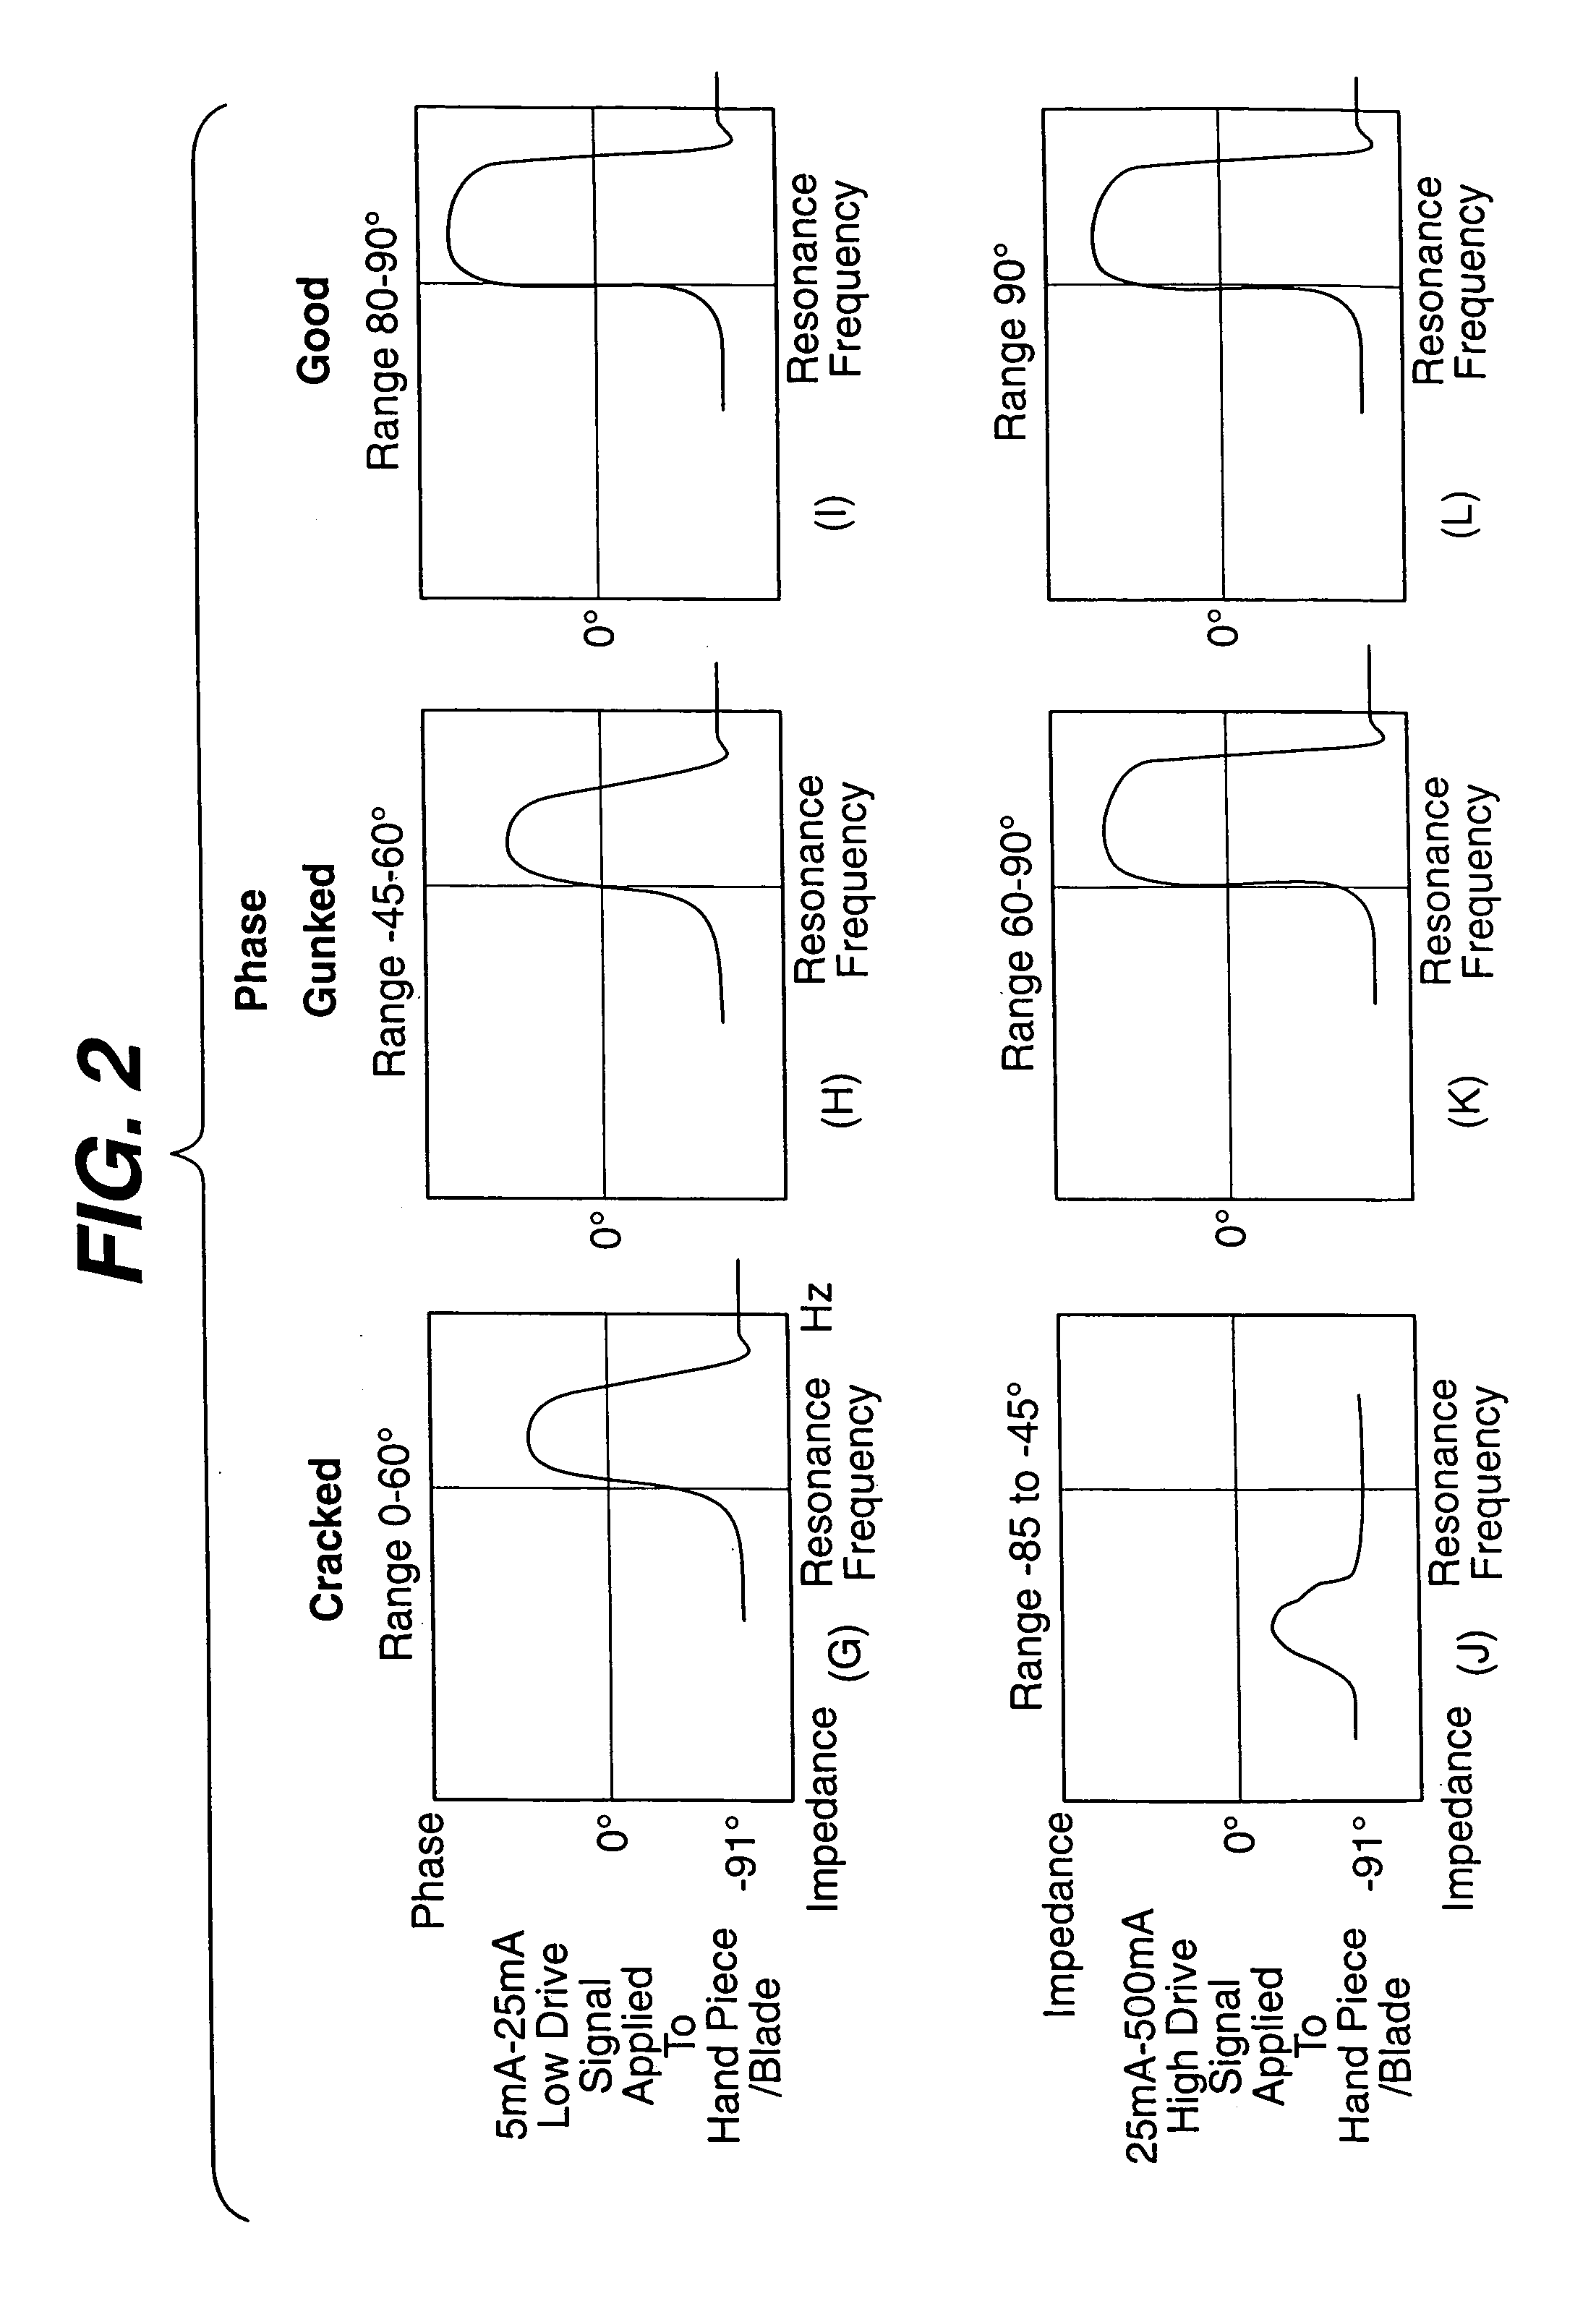 Method for differentiating between burdened and cracked ultrasonically tuned blades